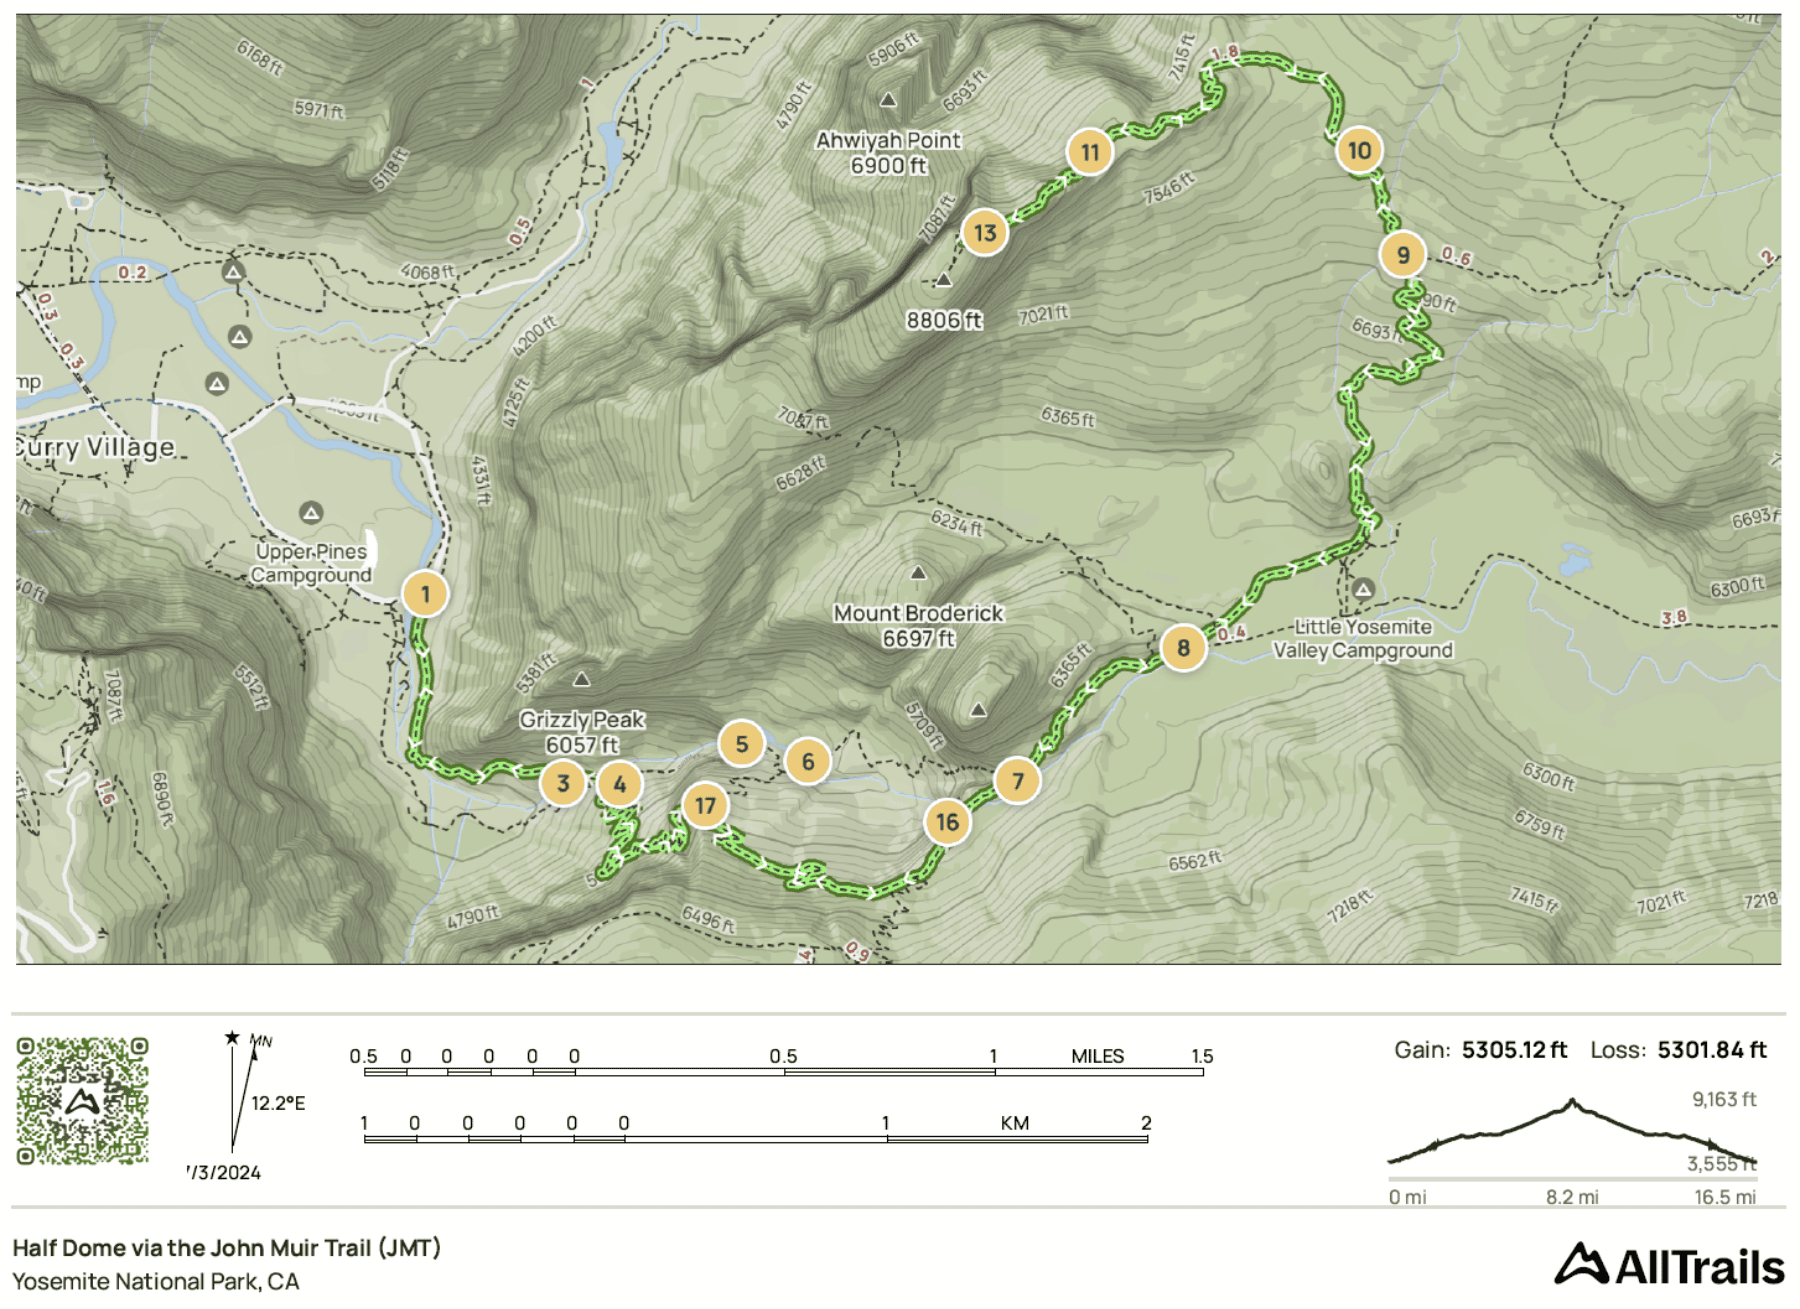 AllTrails Map of Half Dome hike from John Muir Trail